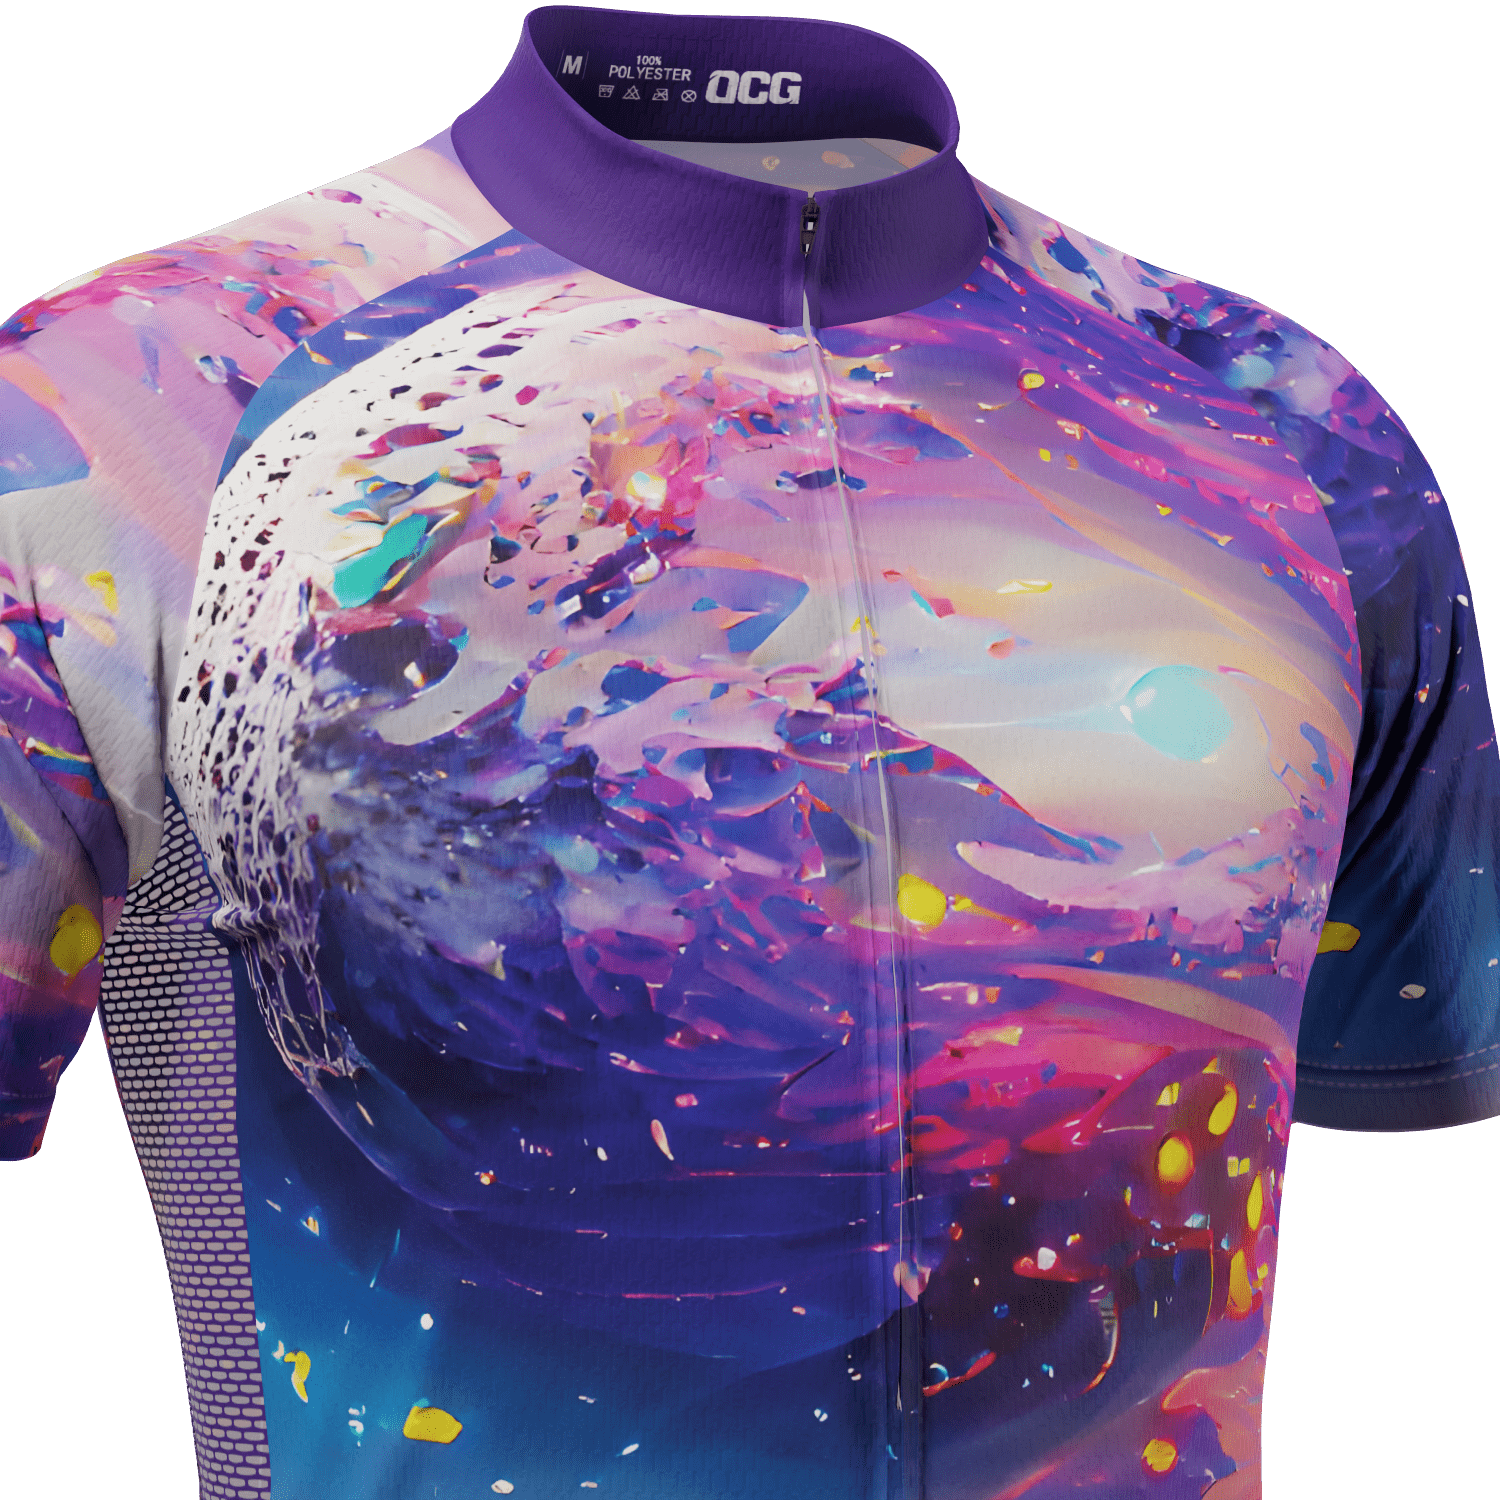 Men's Planets Short Sleeve Cycling Jersey